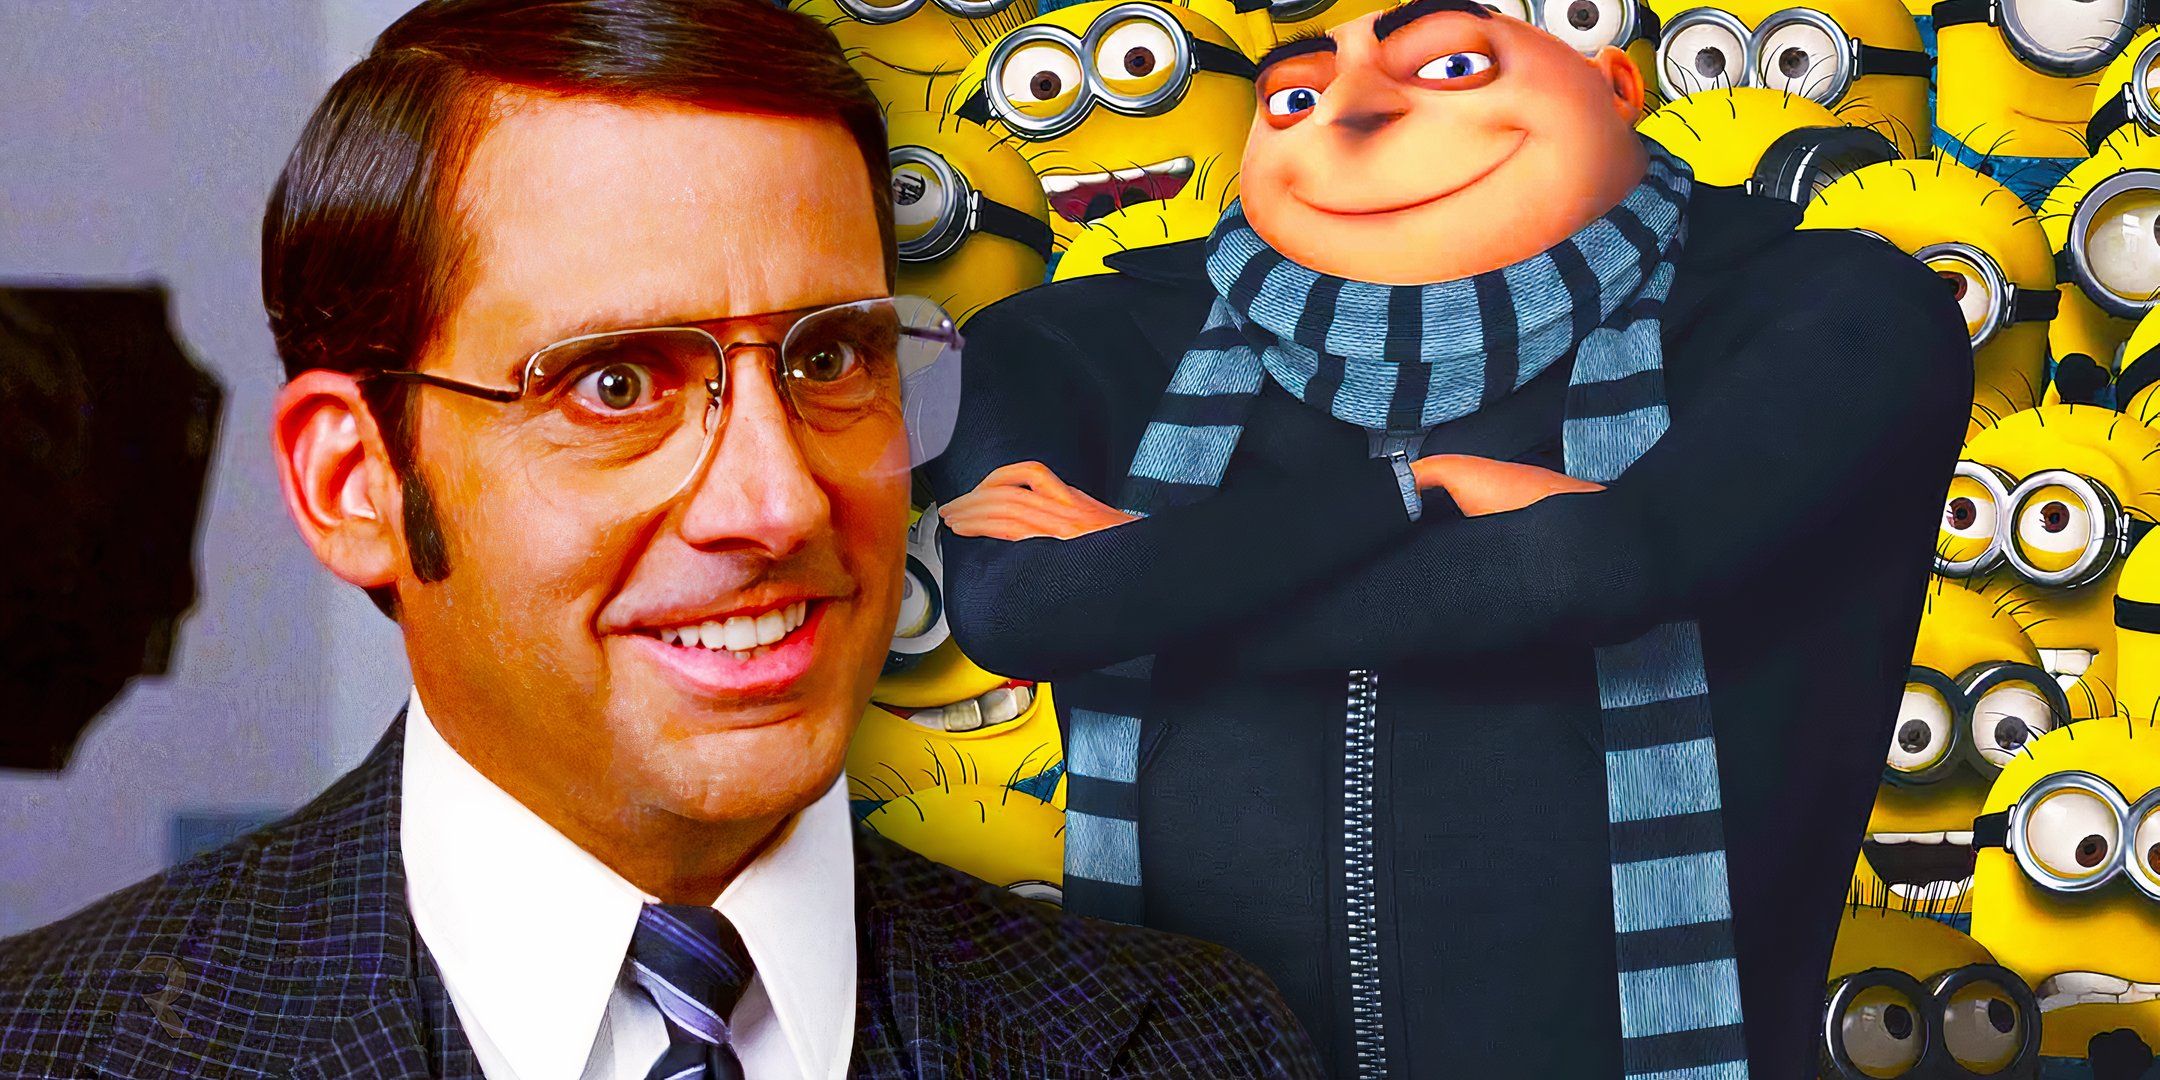 Despicable Me 4 Makes A Steve Carell Dream Come True After Only 2 Years